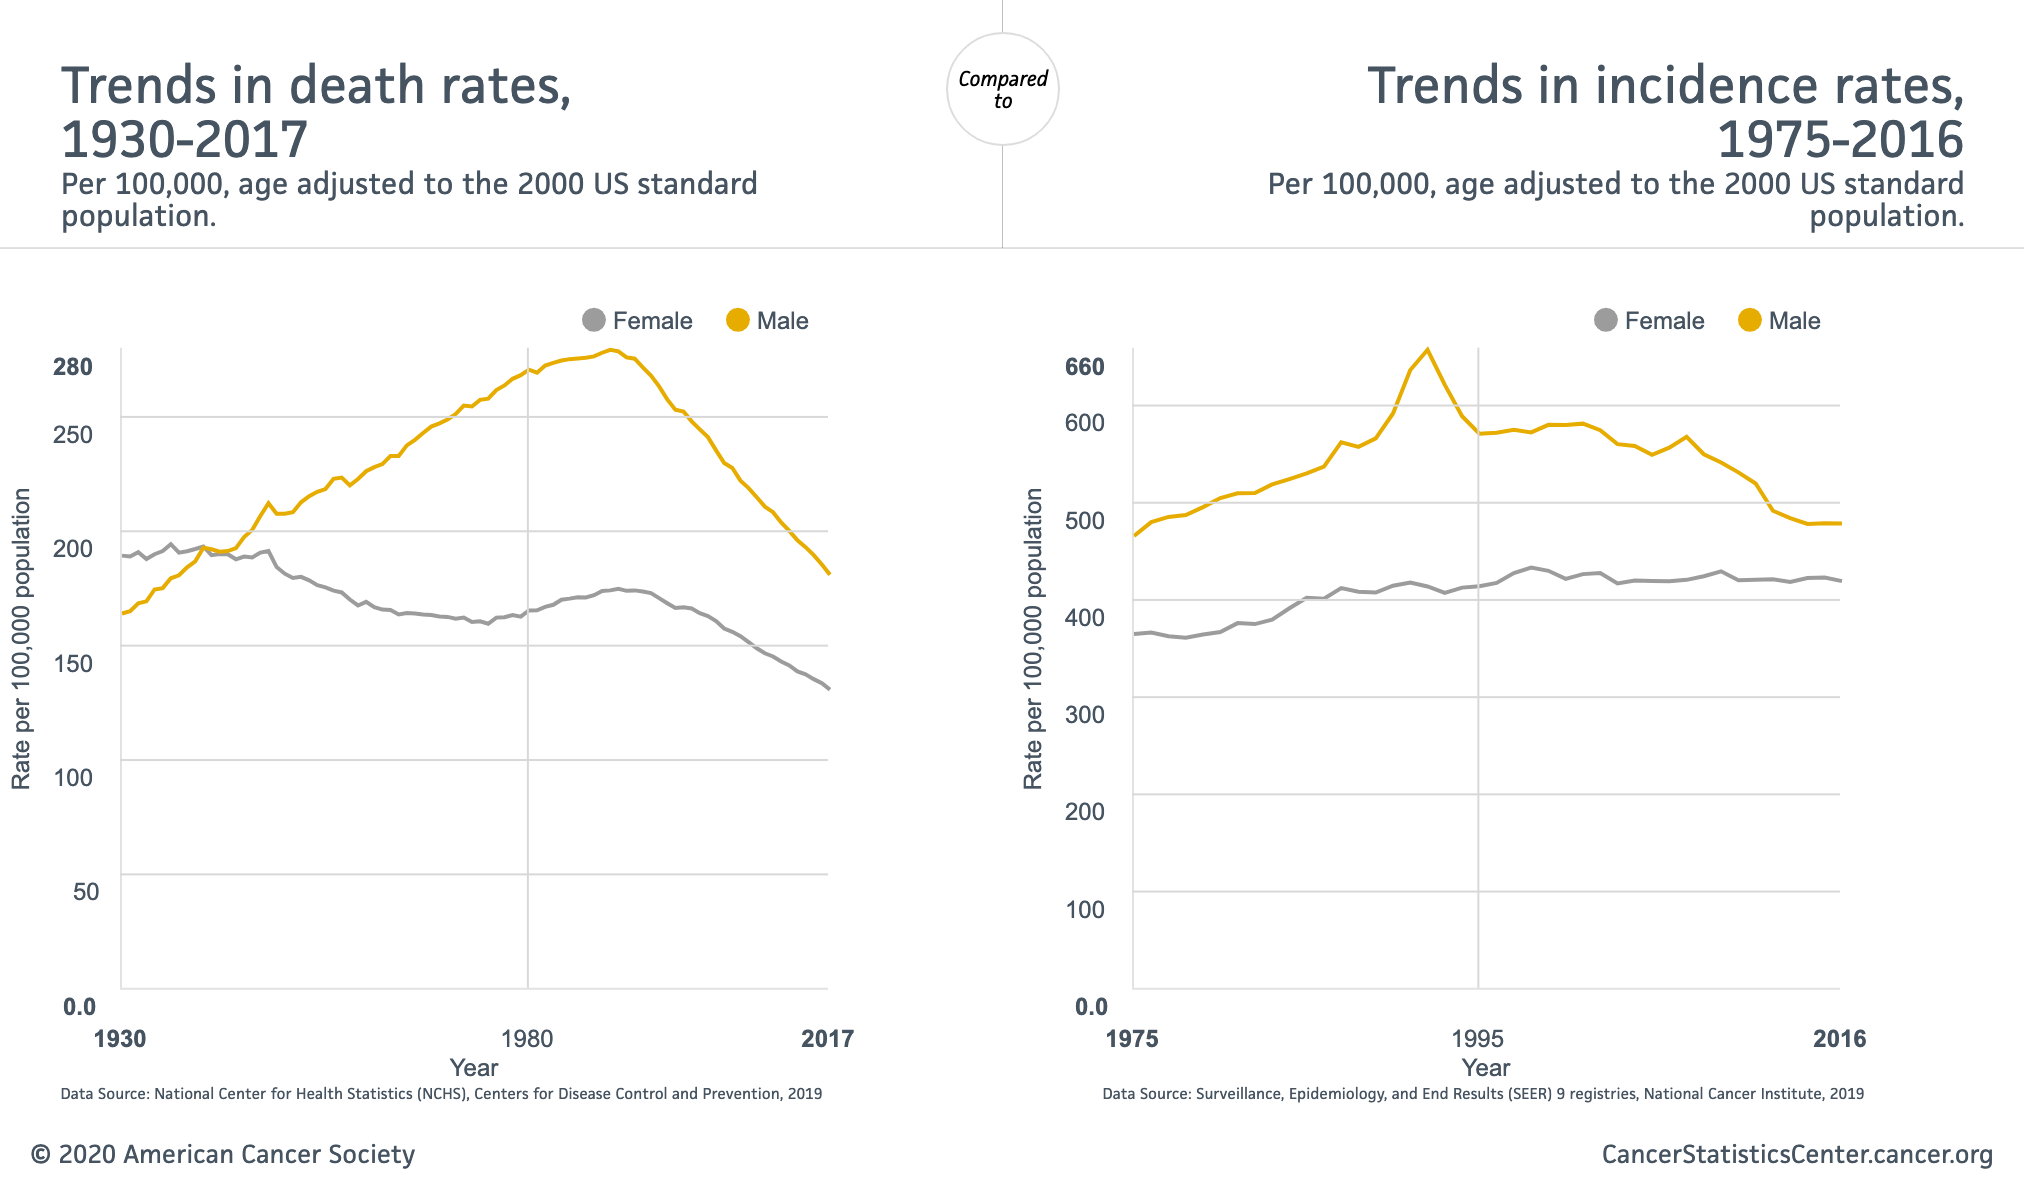 Trends in Death Rates, 1930-2017